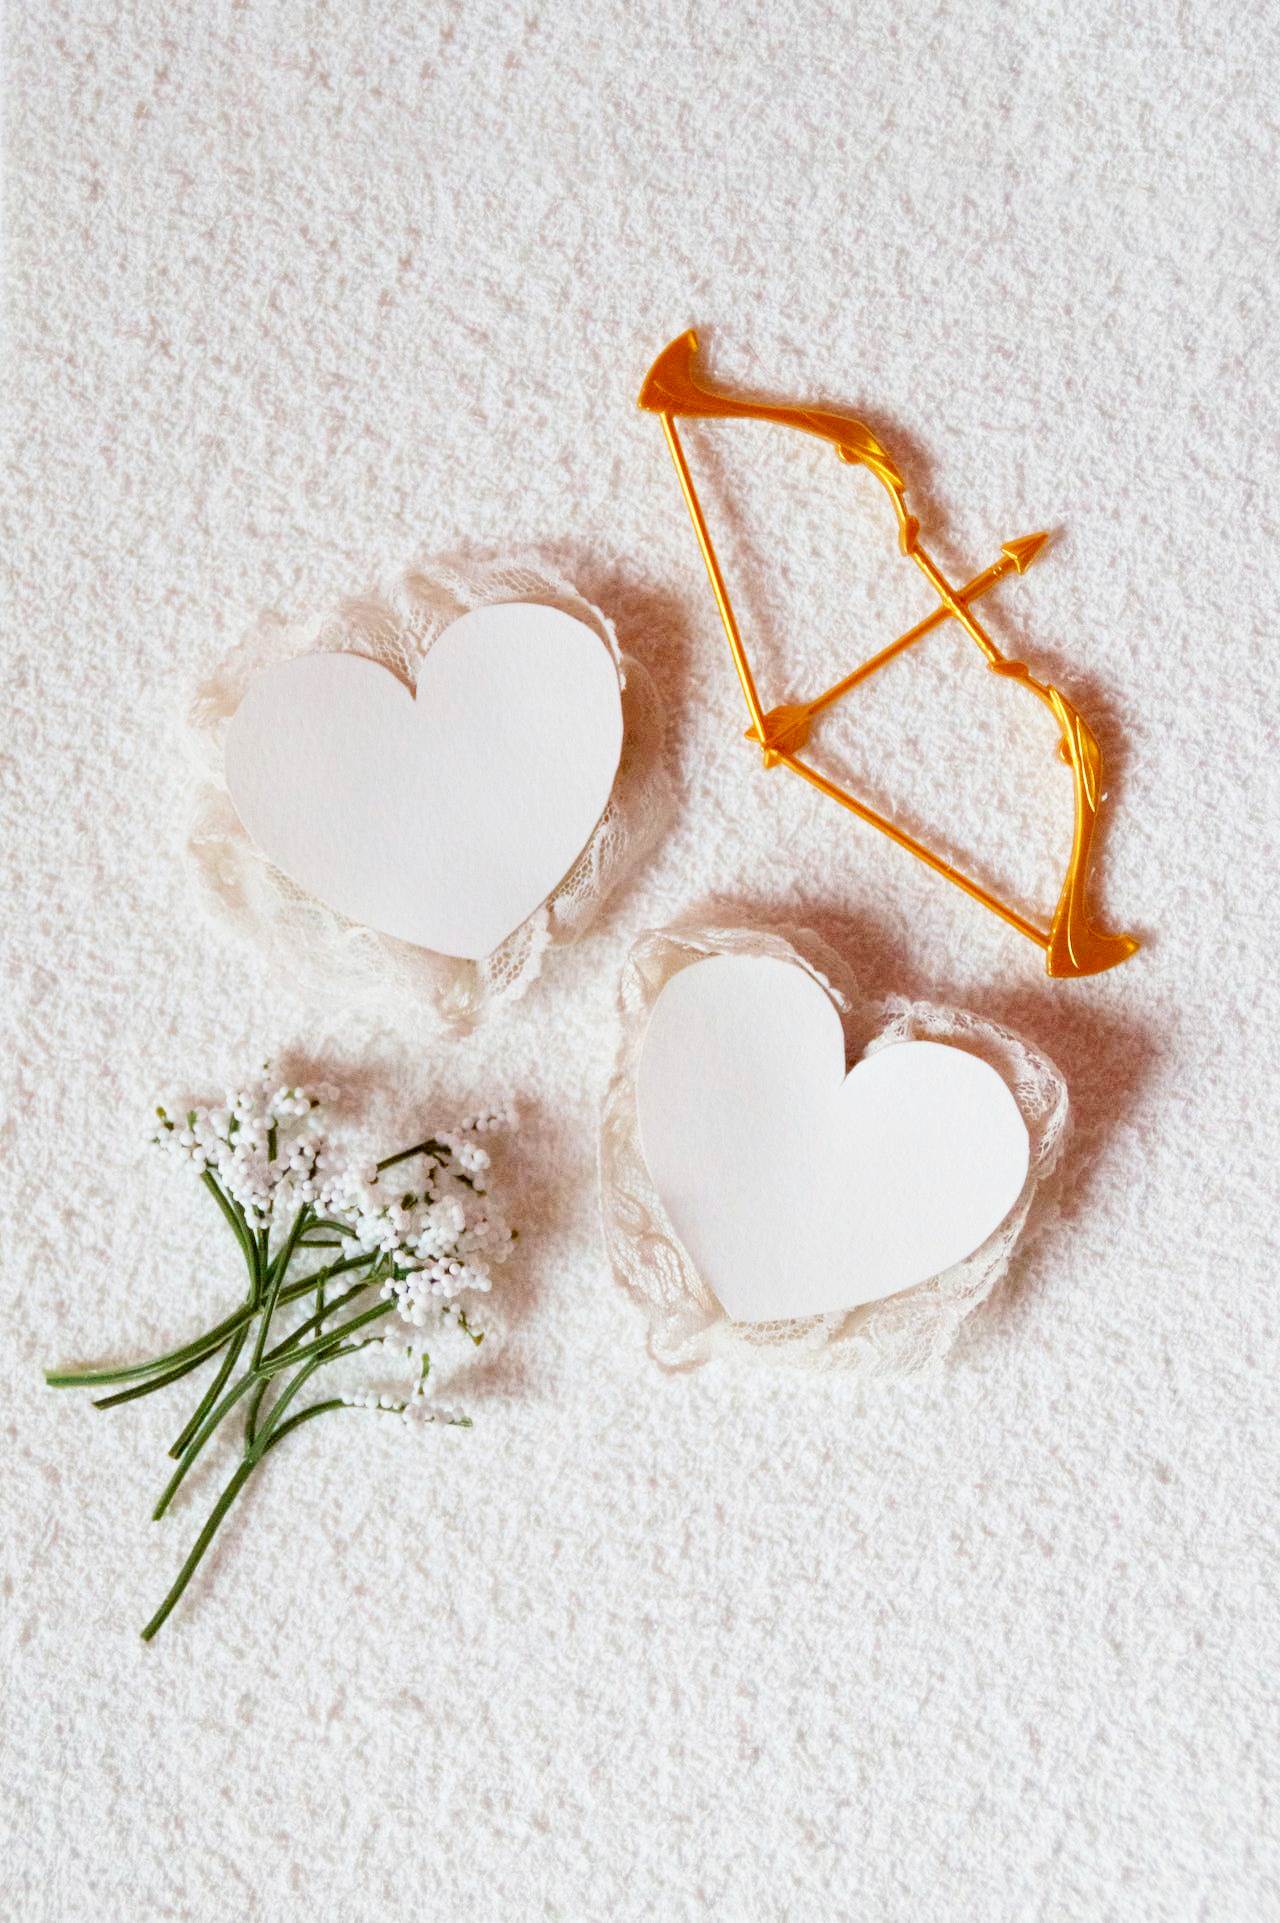 Photo by Mich Graphics: https://www.pexels.com/photo/valentines-day-flatlay-of-lacy-valentines-cards-white-flowers-and-a-golden-bow-and-arrow-15438132/